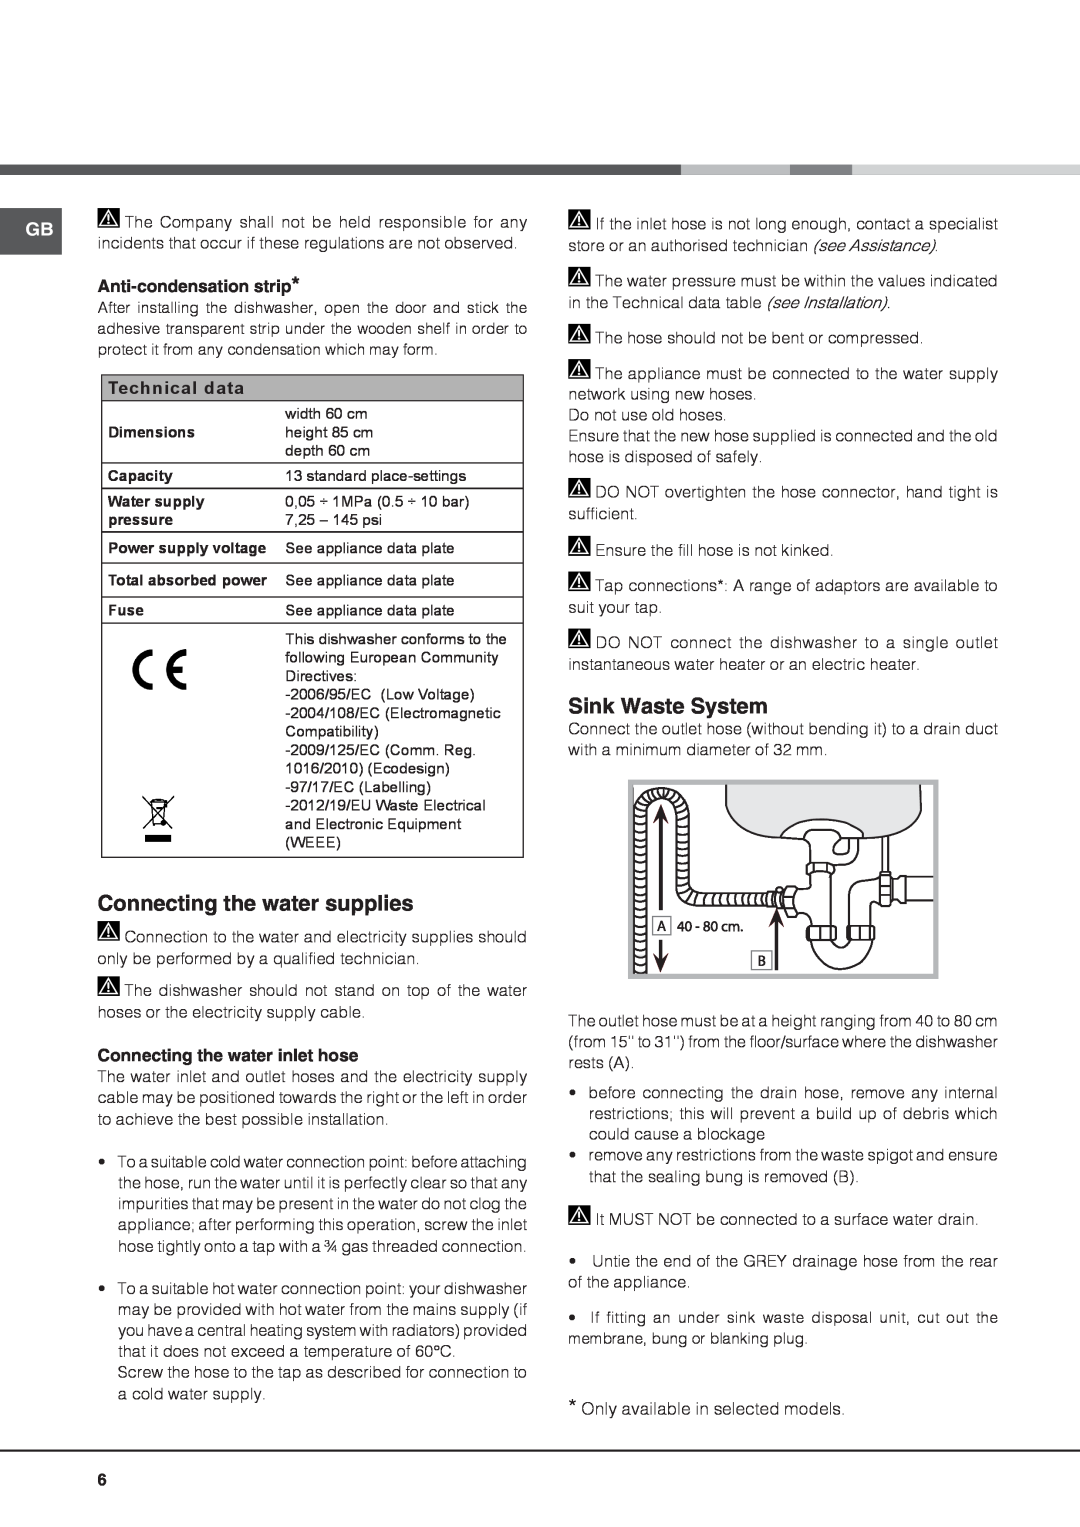 Hotpoint FDYF 11011 Style manual Connecting the water supplies, Sink Waste System, Anti-condensationstrip, Technical data 